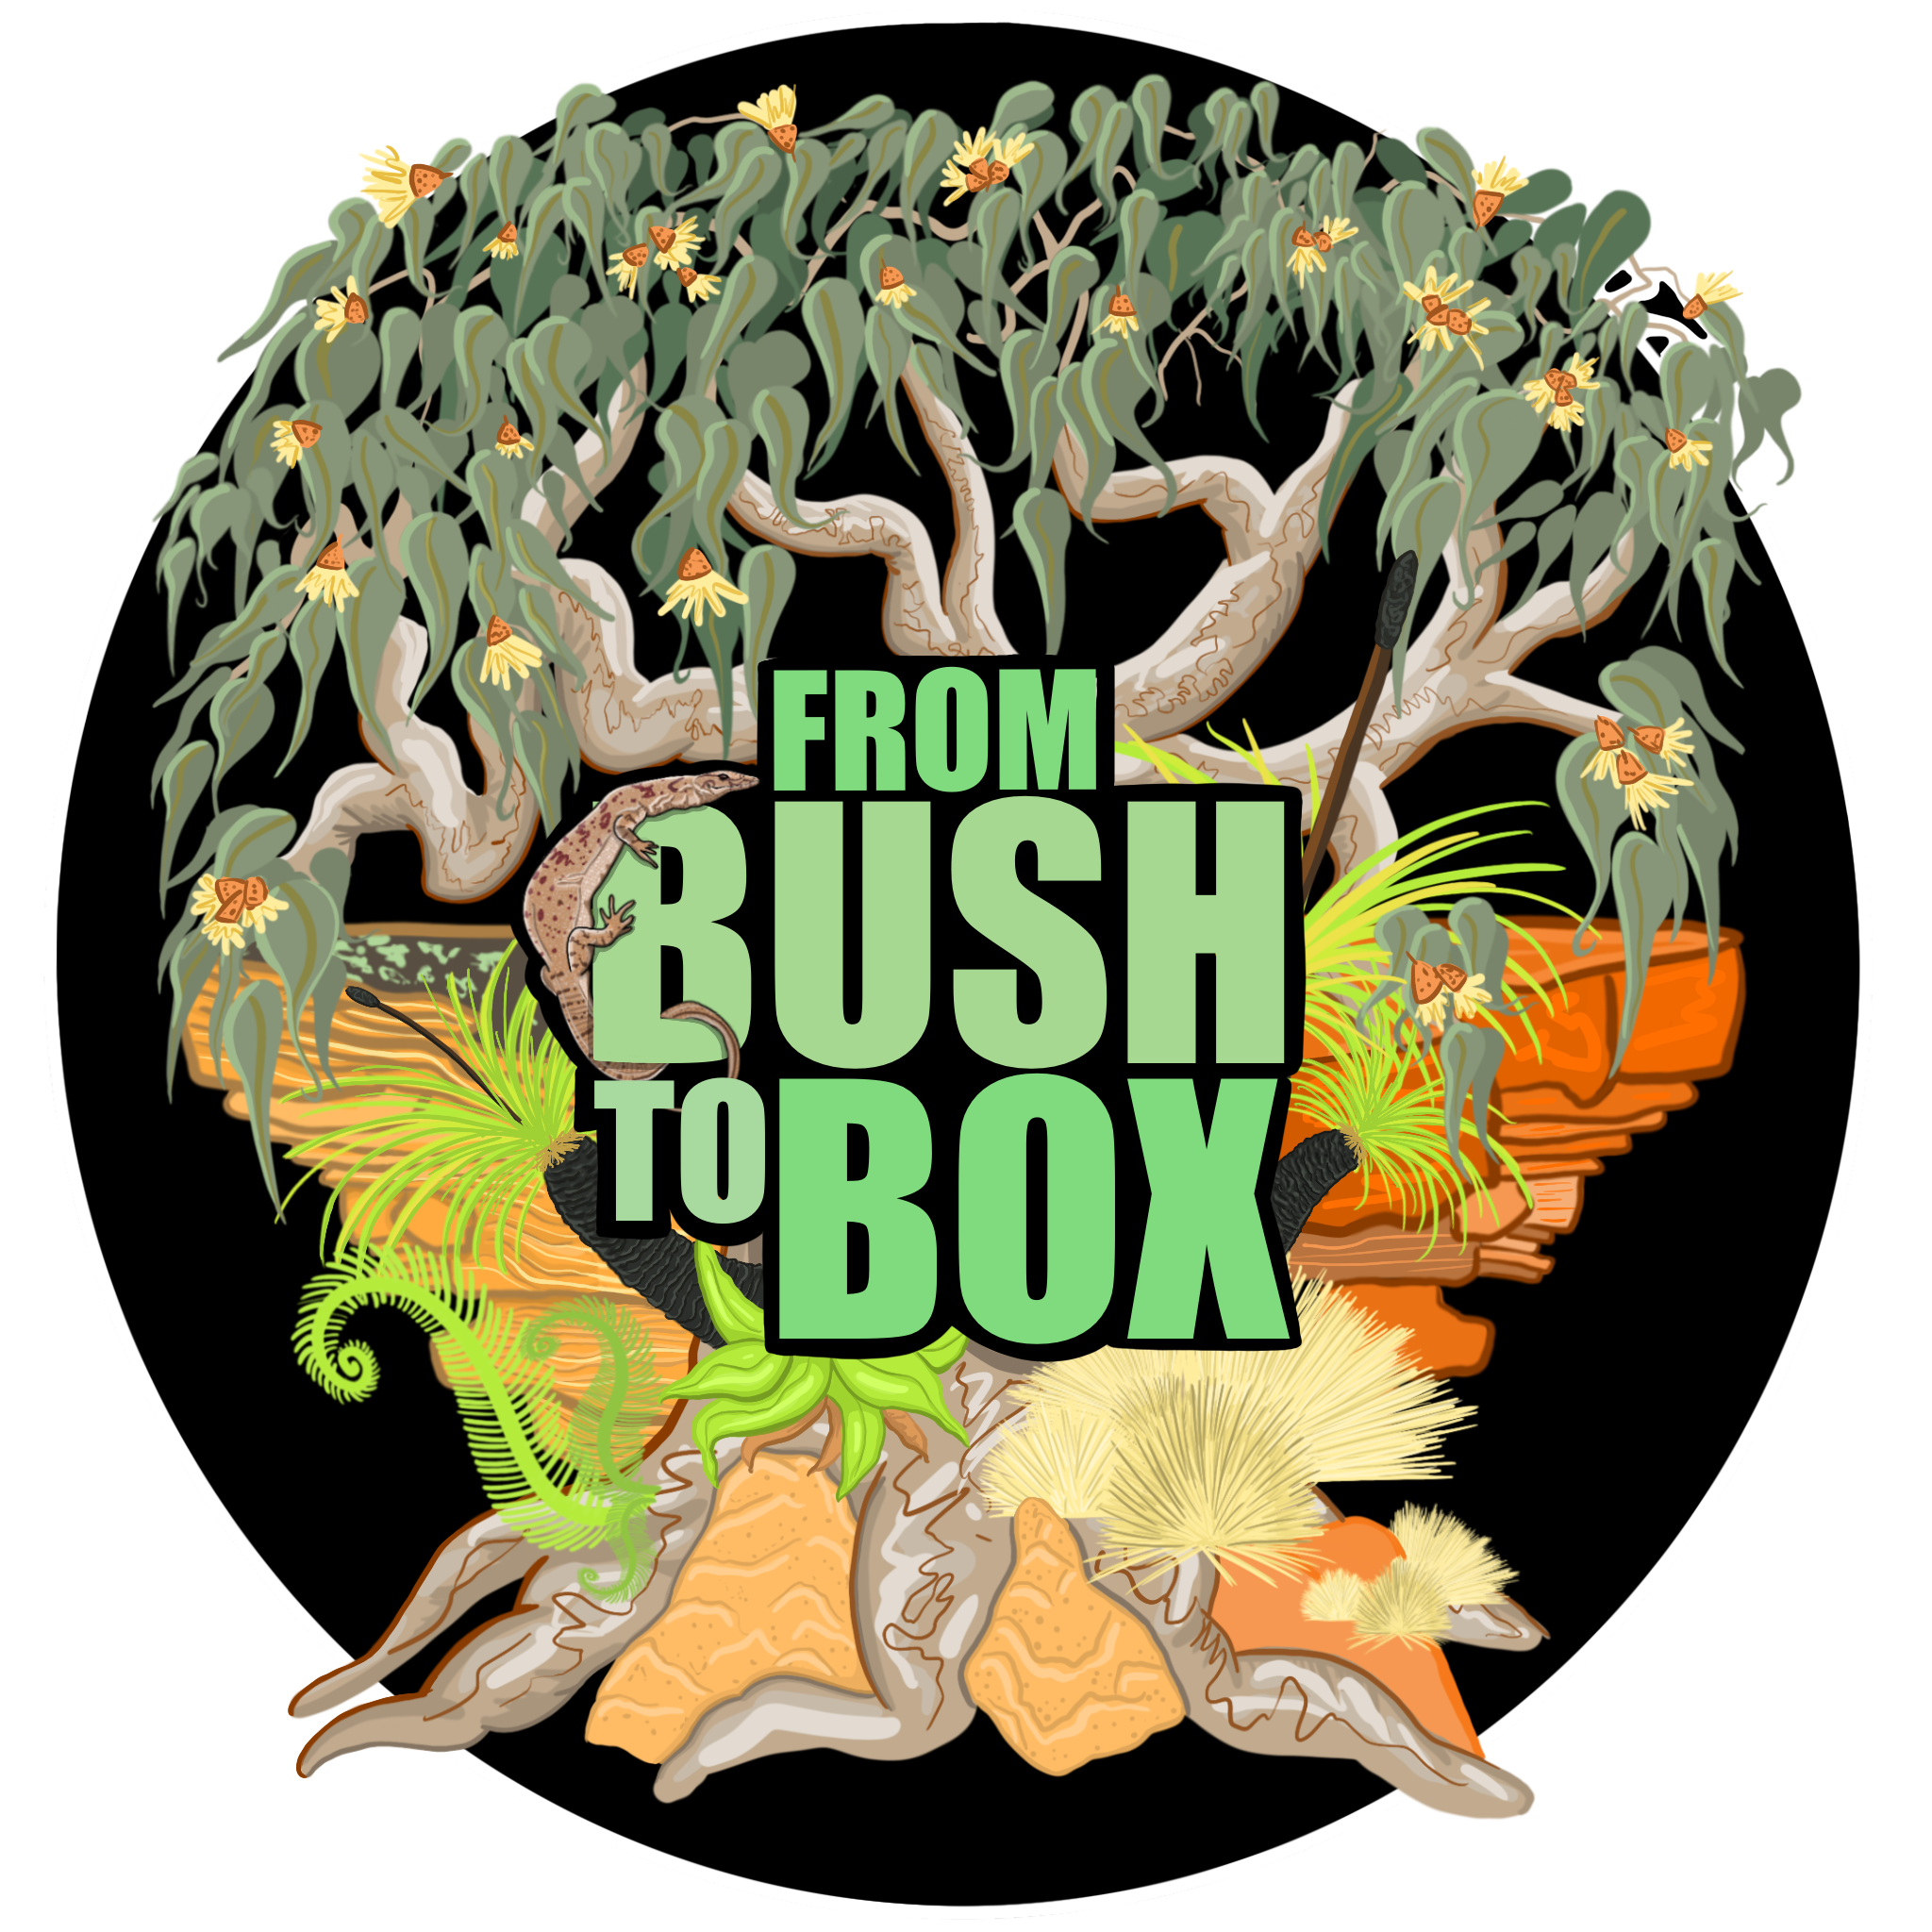 From Bush To Box